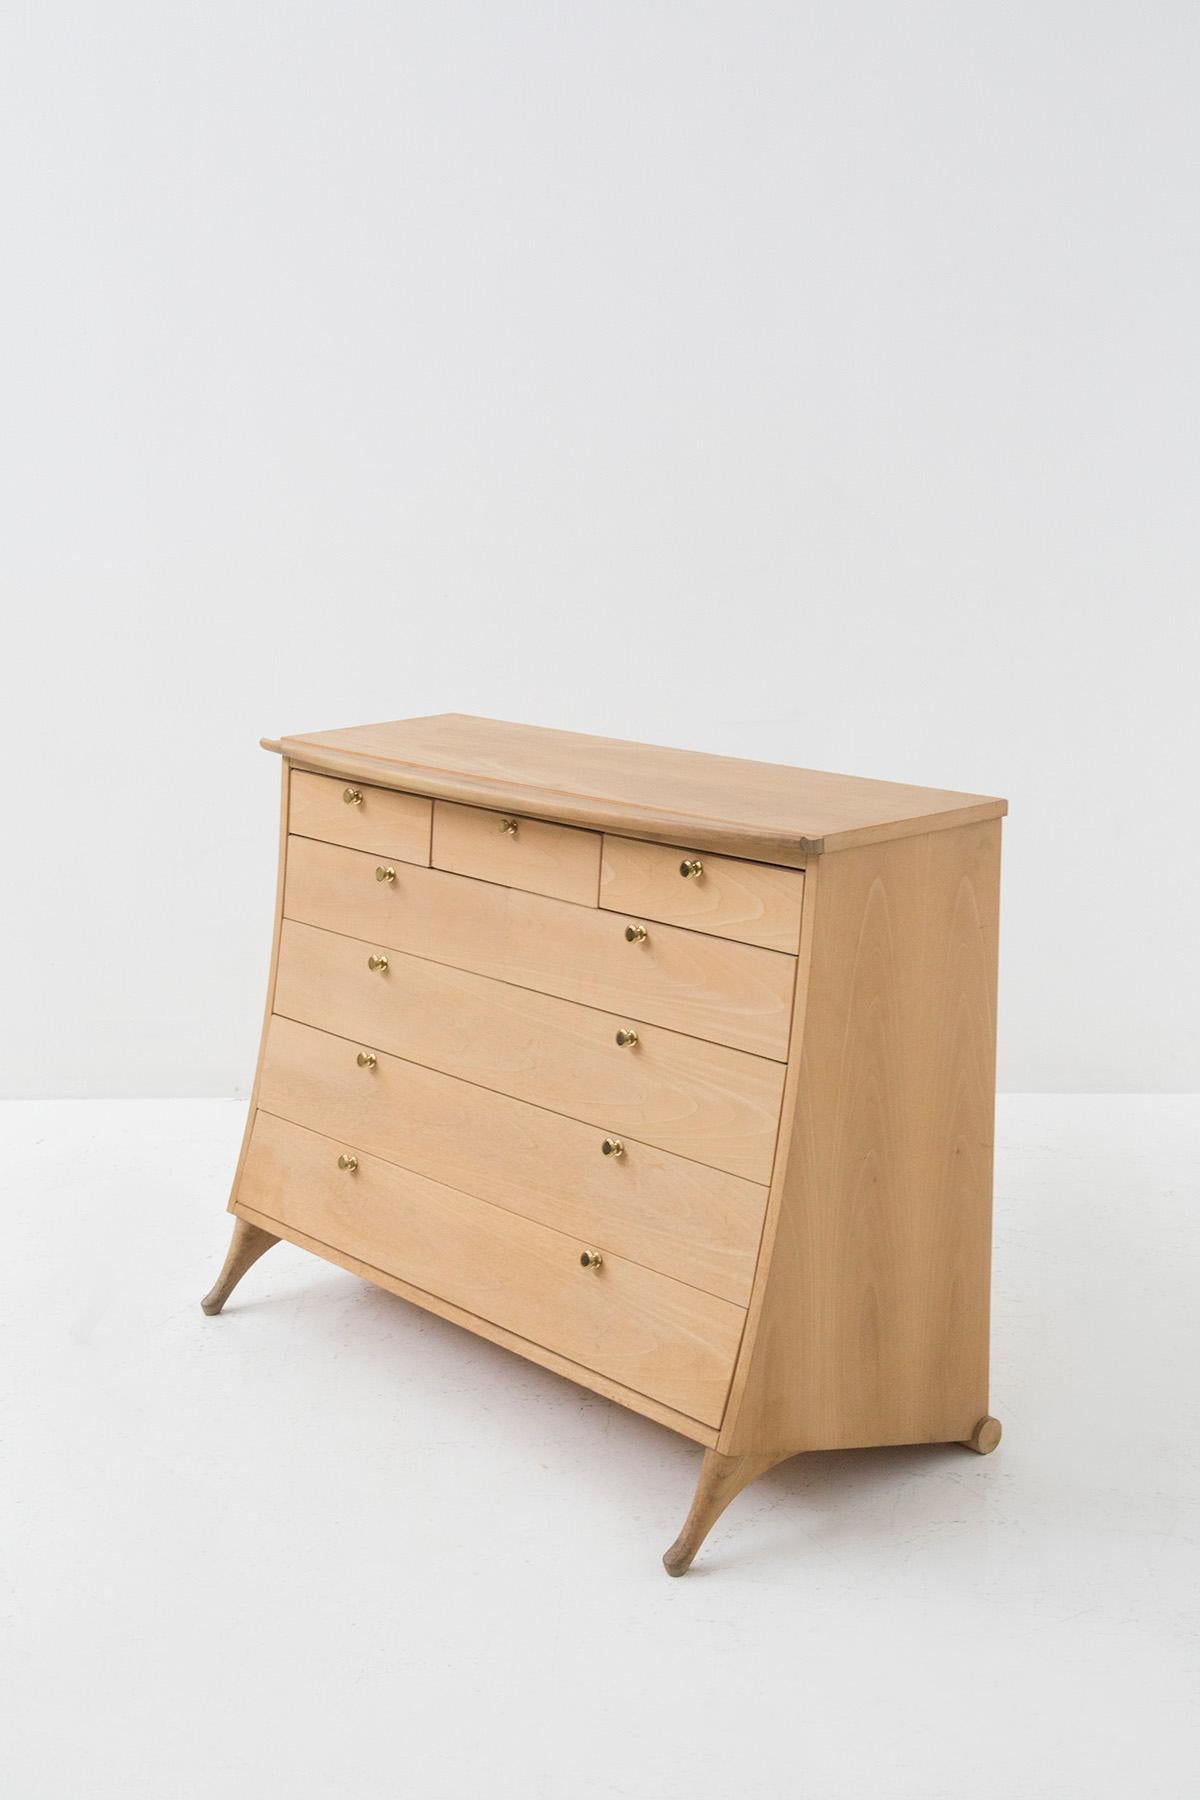 Umberto Asnago for Giorgetti, Postmodern Italian chest of drawers For Sale 1